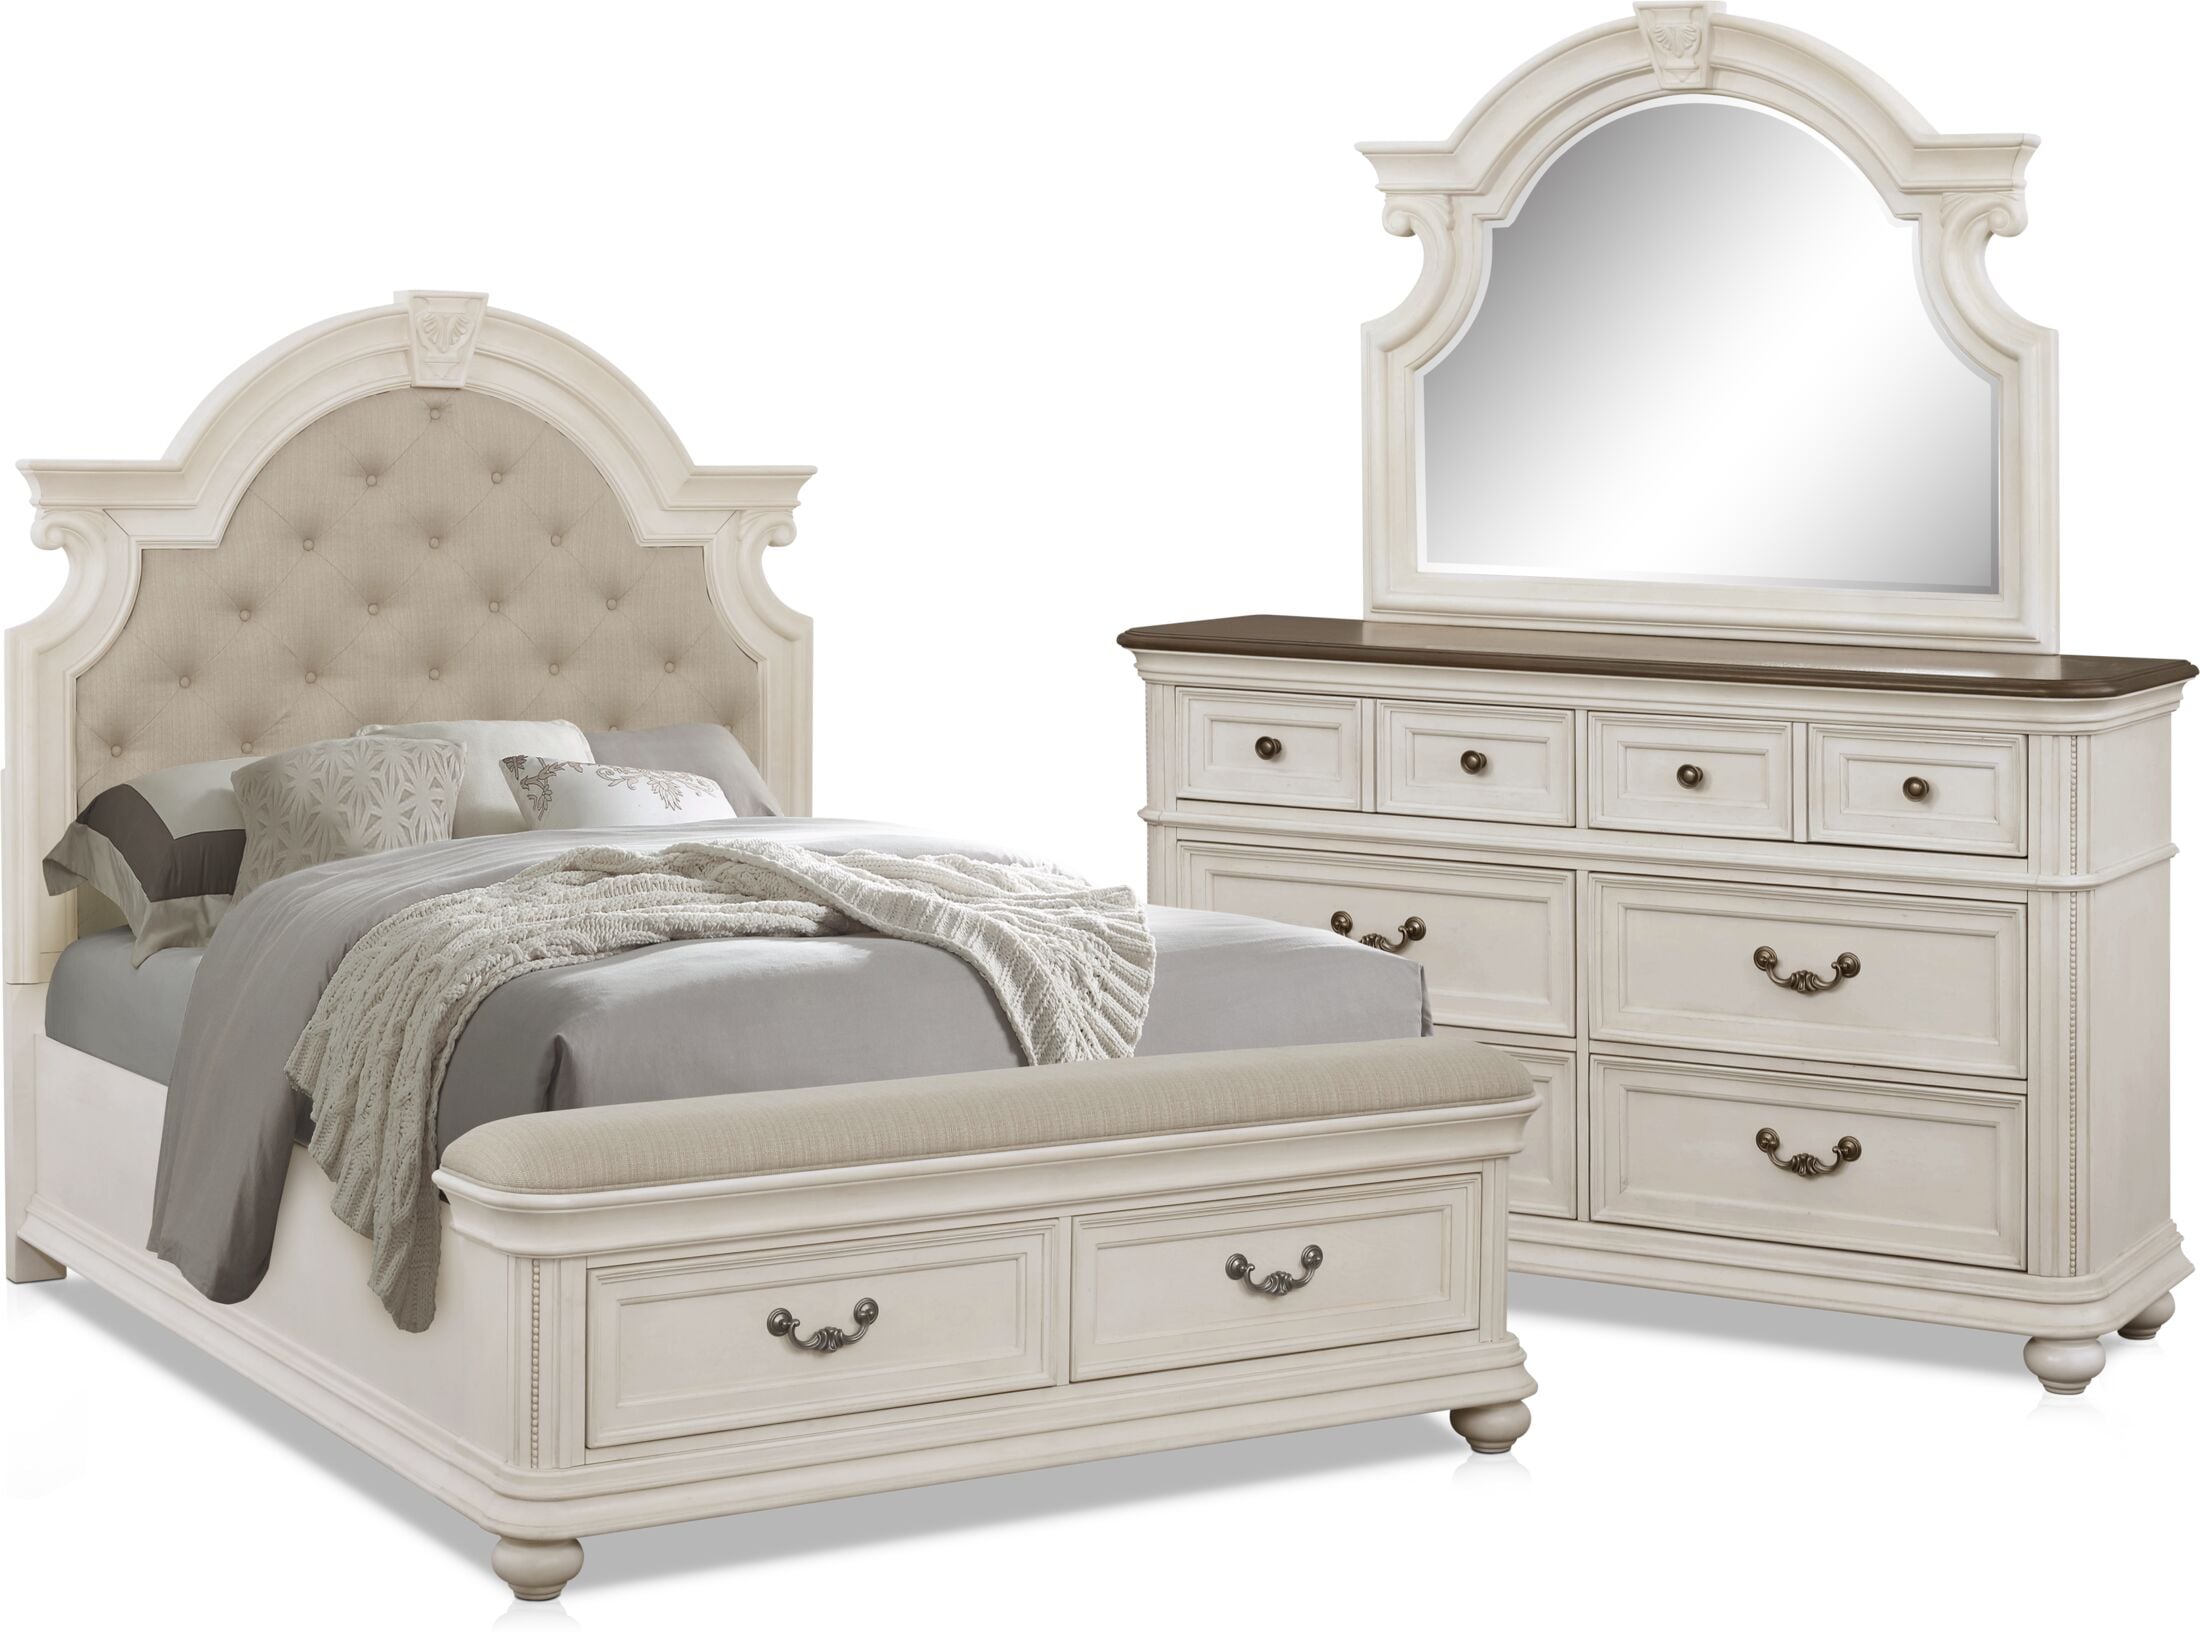 value of my bedroom furniture